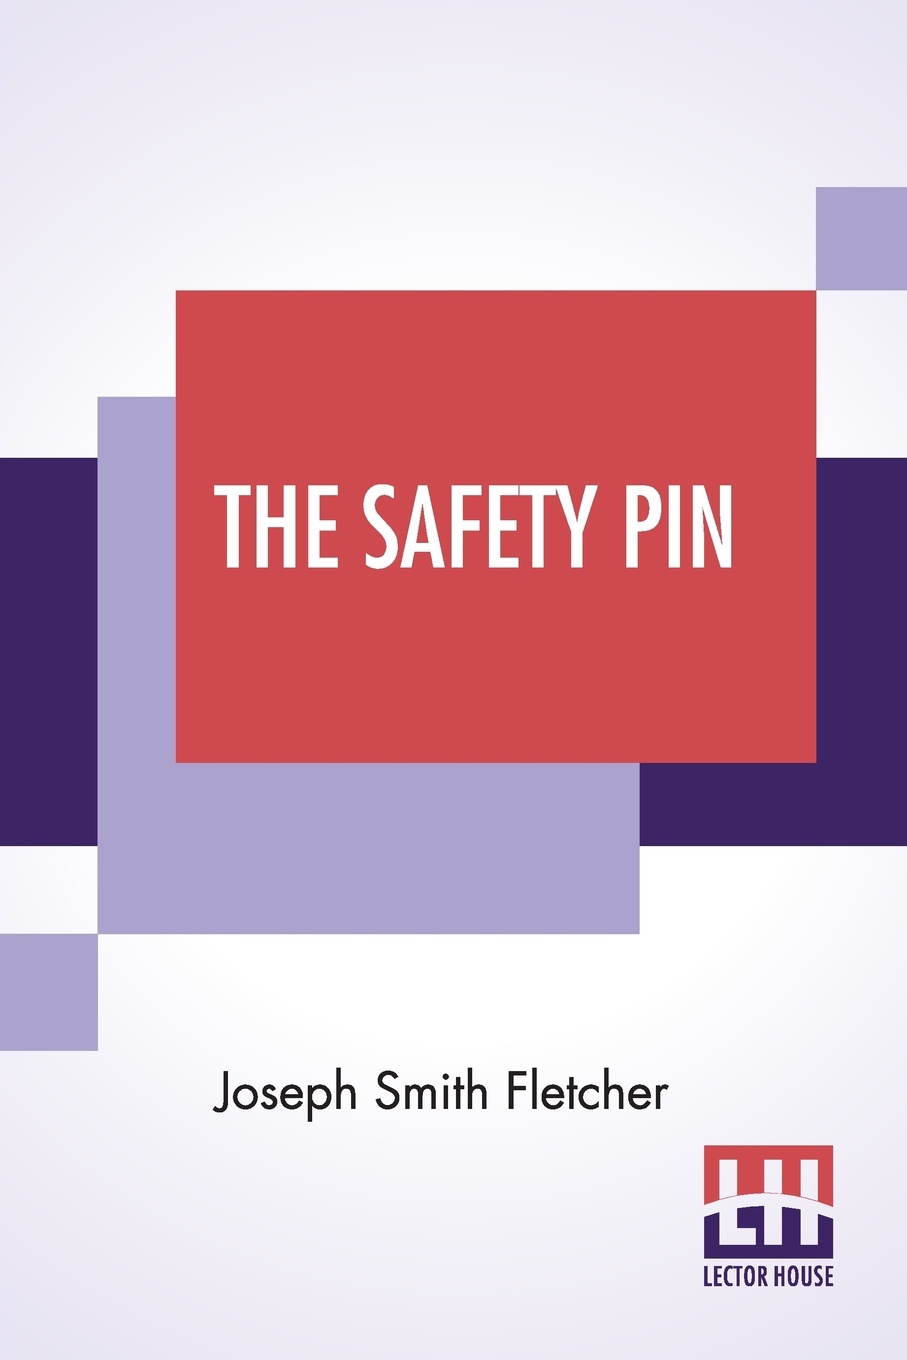 The Safety Pin